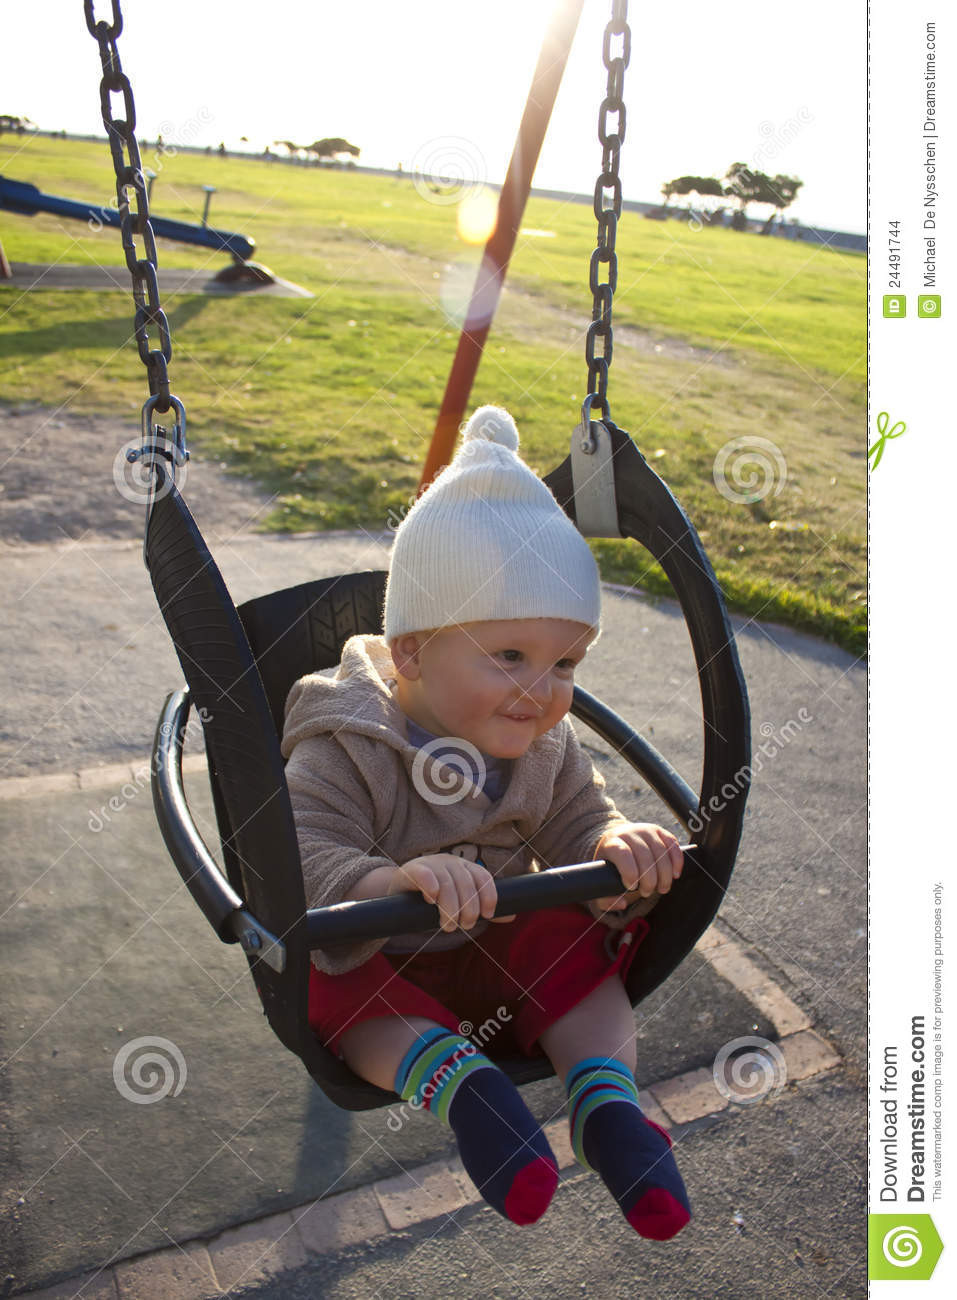 Best ideas about Baby Outdoor Swing
. Save or Pin Baby In Outdoor Swing Stock Image Now.